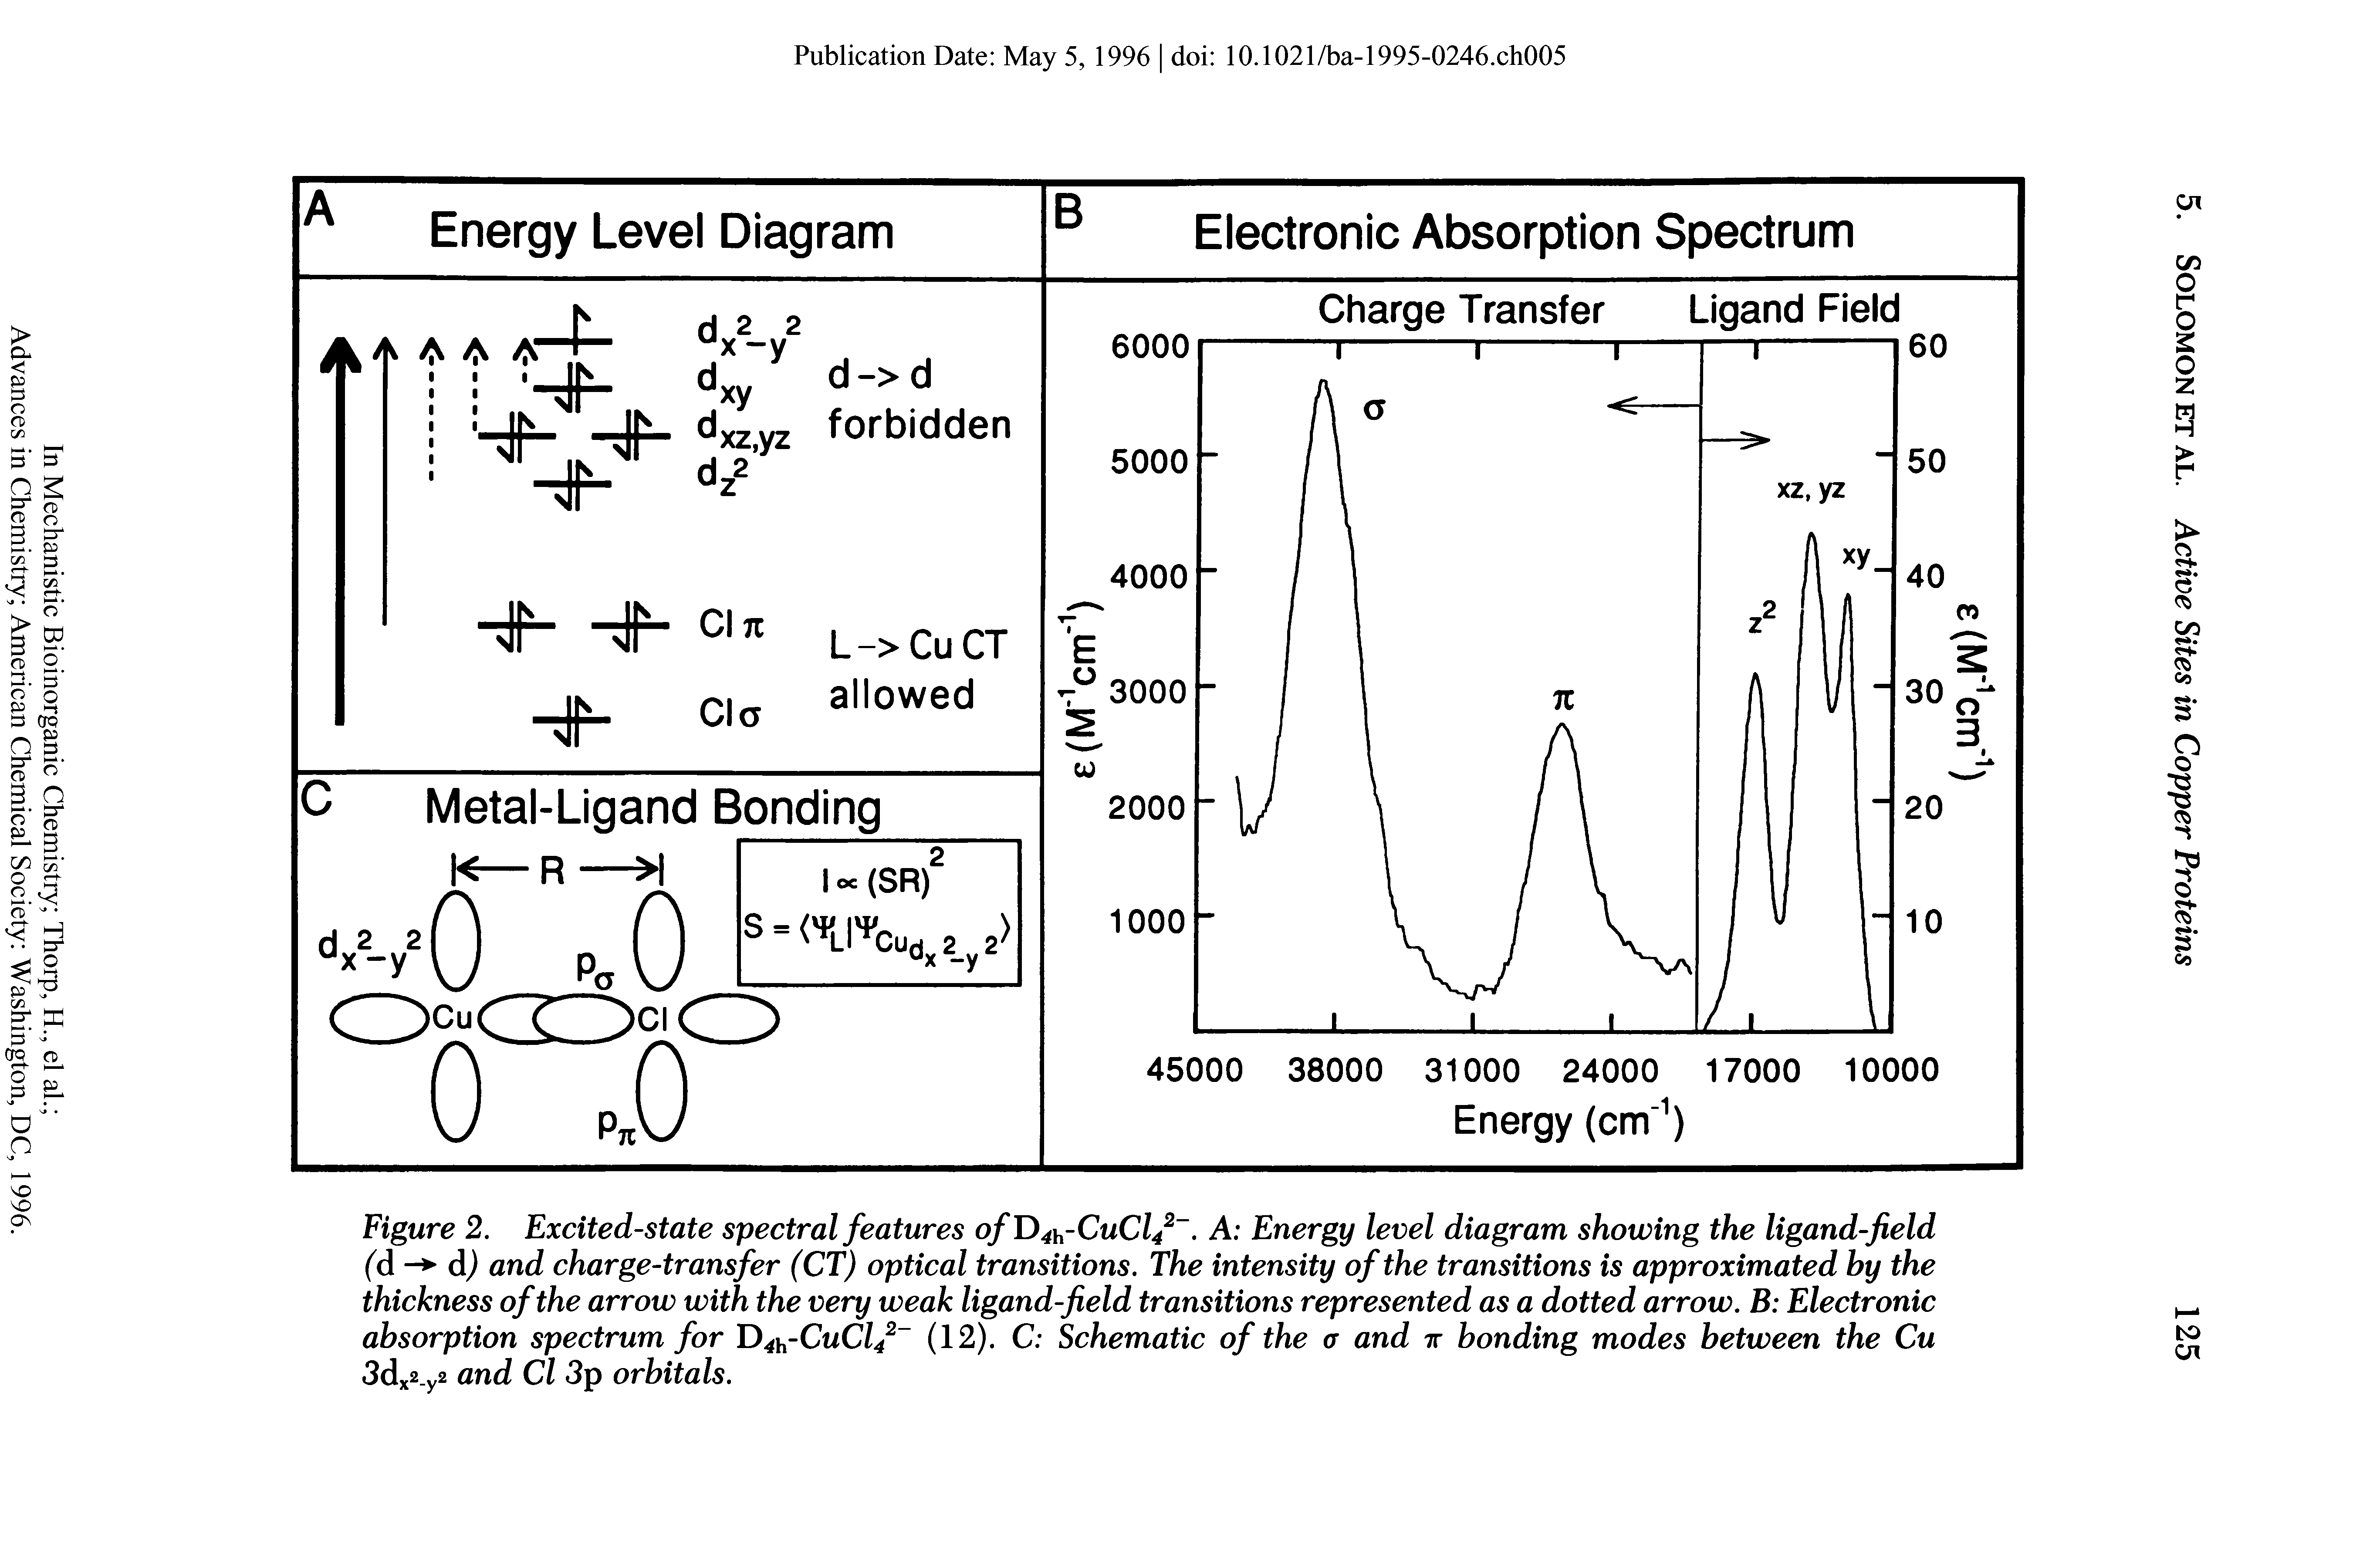 Figure 2. Excited-state spectral features ofD -CuCl/-. A Energy level diagram showing the ligand-field (d - d) and charge-transfer (CT) optical transitions. The intensity of the transitions is approximated by the thickness of the arrow with the very weak ligand-field transitions represented as a dotted arrow. B Electronic absorption spectrum for D4h-CuCl42 (12). C Schematic of the a and tt bonding modes between the Cu 3dx2 y2 and Cl 3p orbitals.